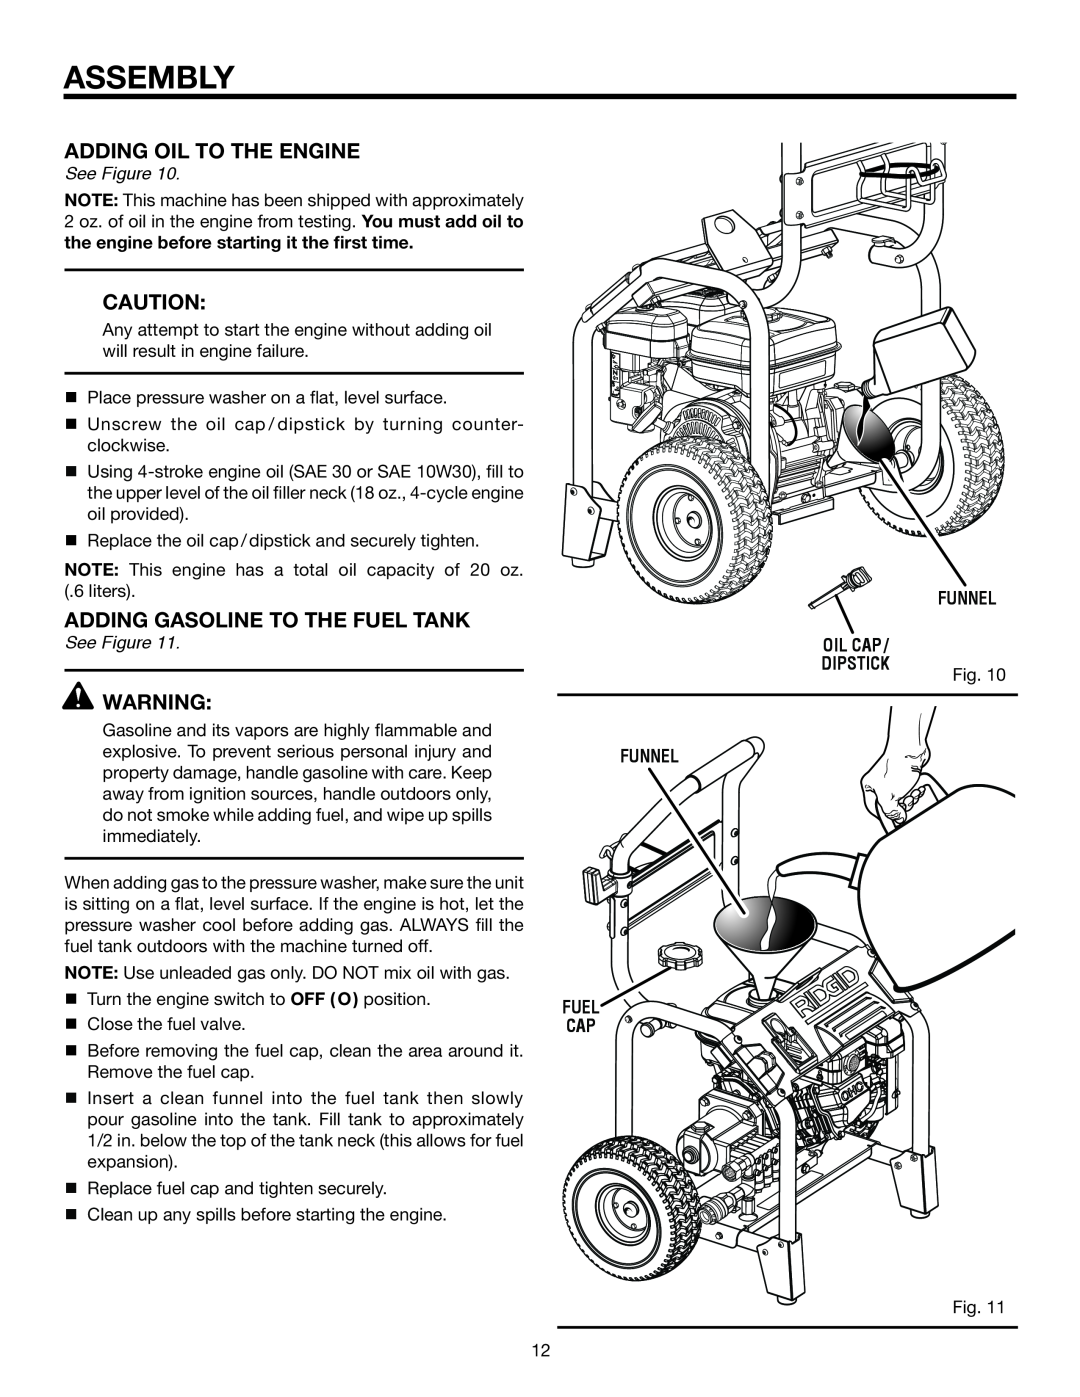 RIDGID RD80763 manual adding oil to the engine, adding gasoline to THE FUEL tank, Funnel, Oil Cap / , Dipstick, Assembly 